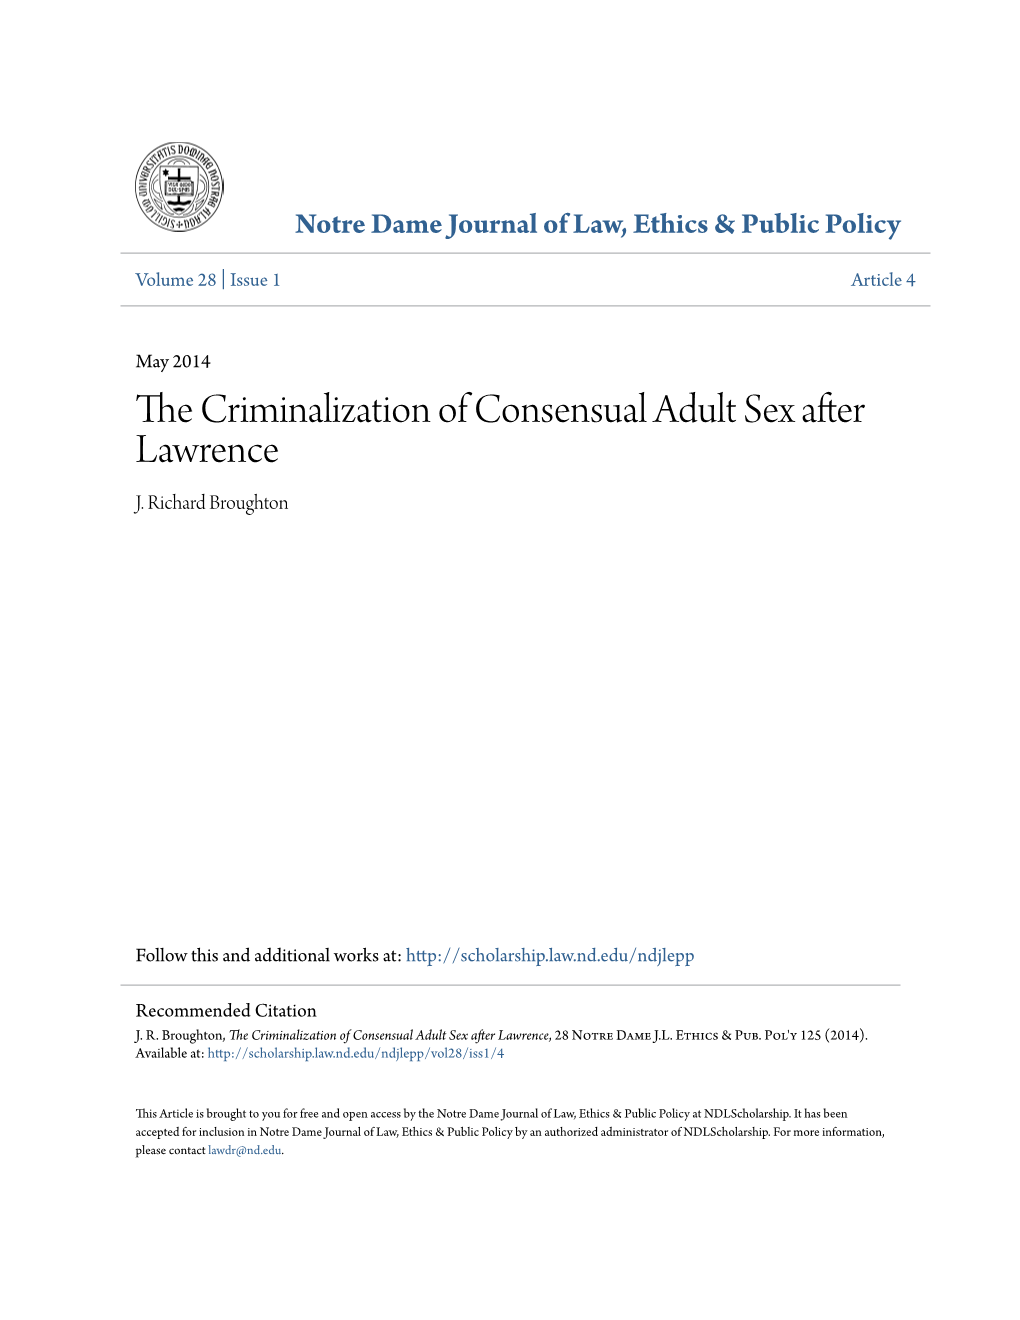 The Criminalization of Consensual Adult Sex After Lawrence, 28 Notre Dame J.L